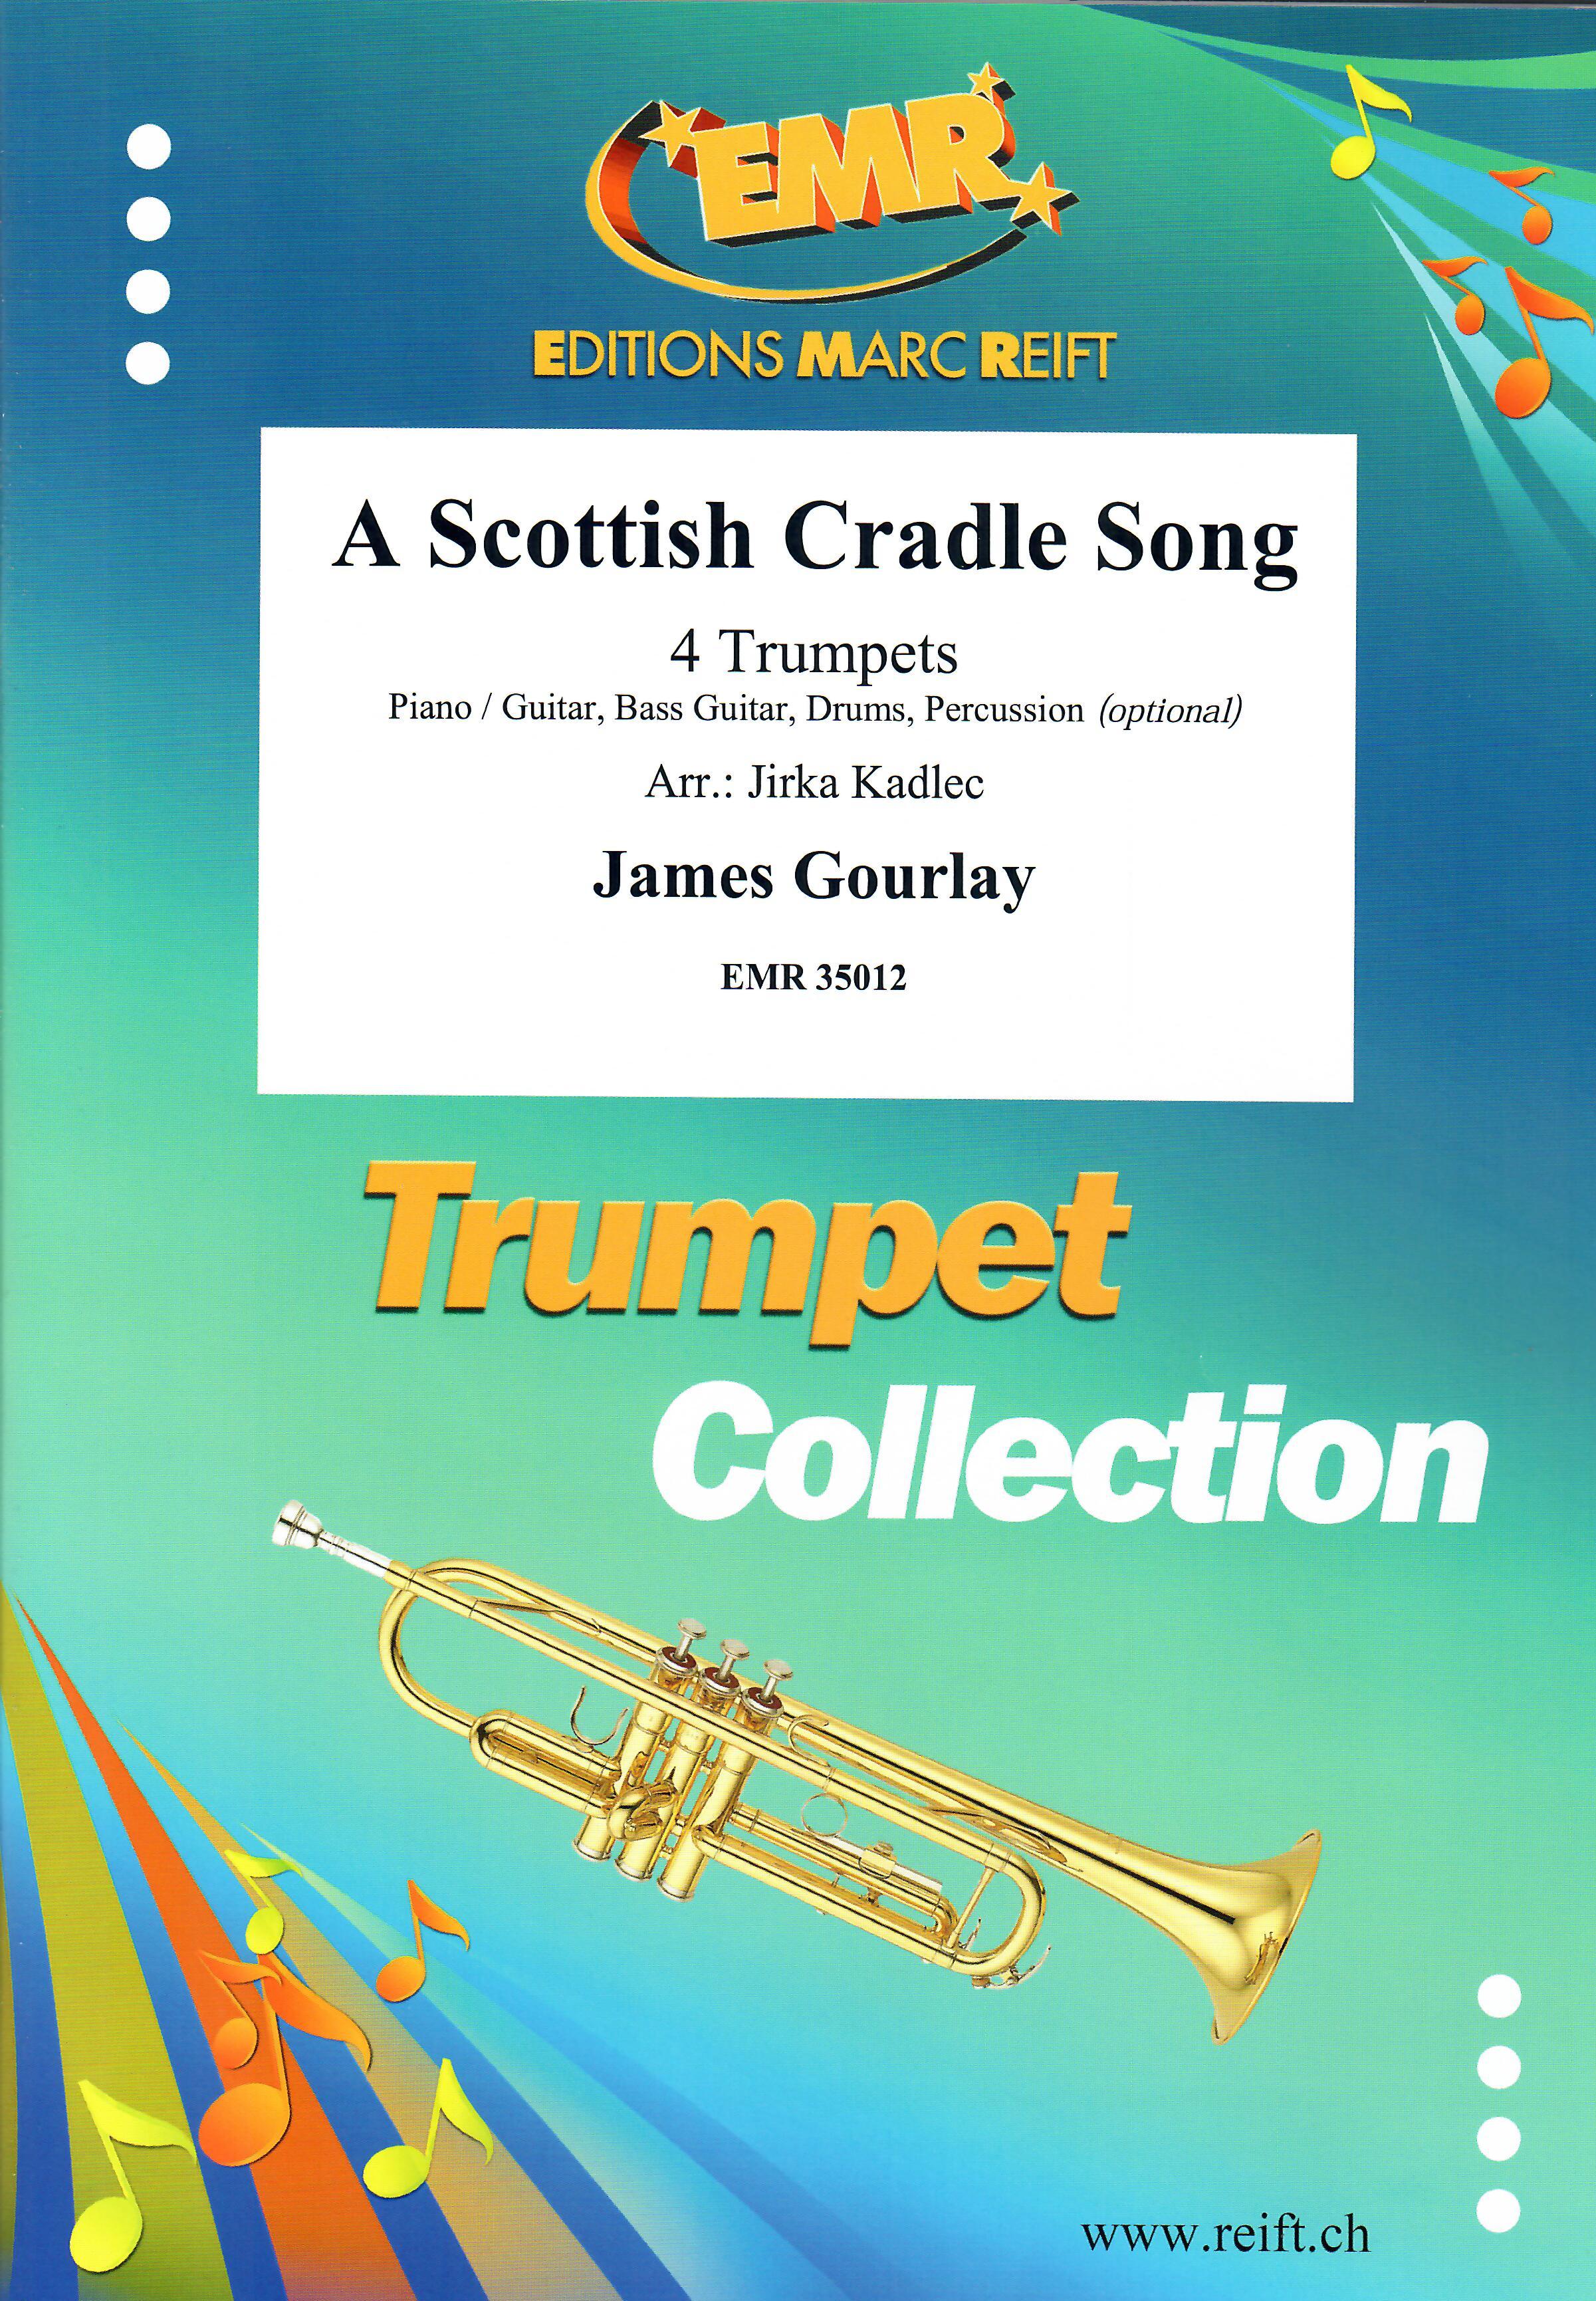 A SCOTTISH CRADLE SONG